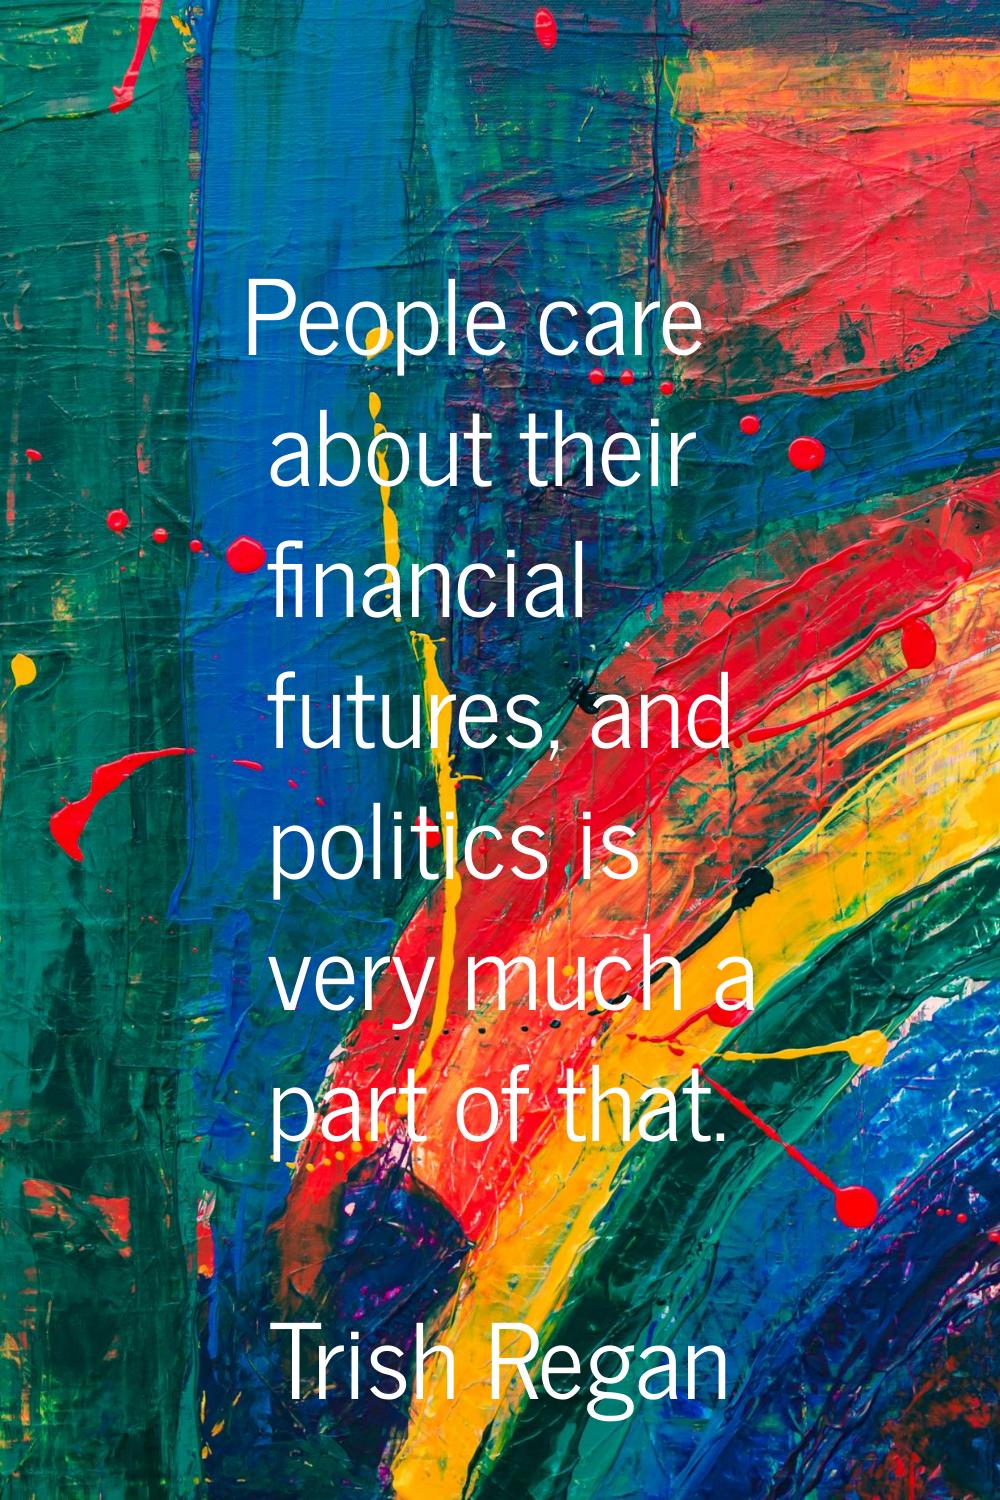 People care about their financial futures, and politics is very much a part of that.